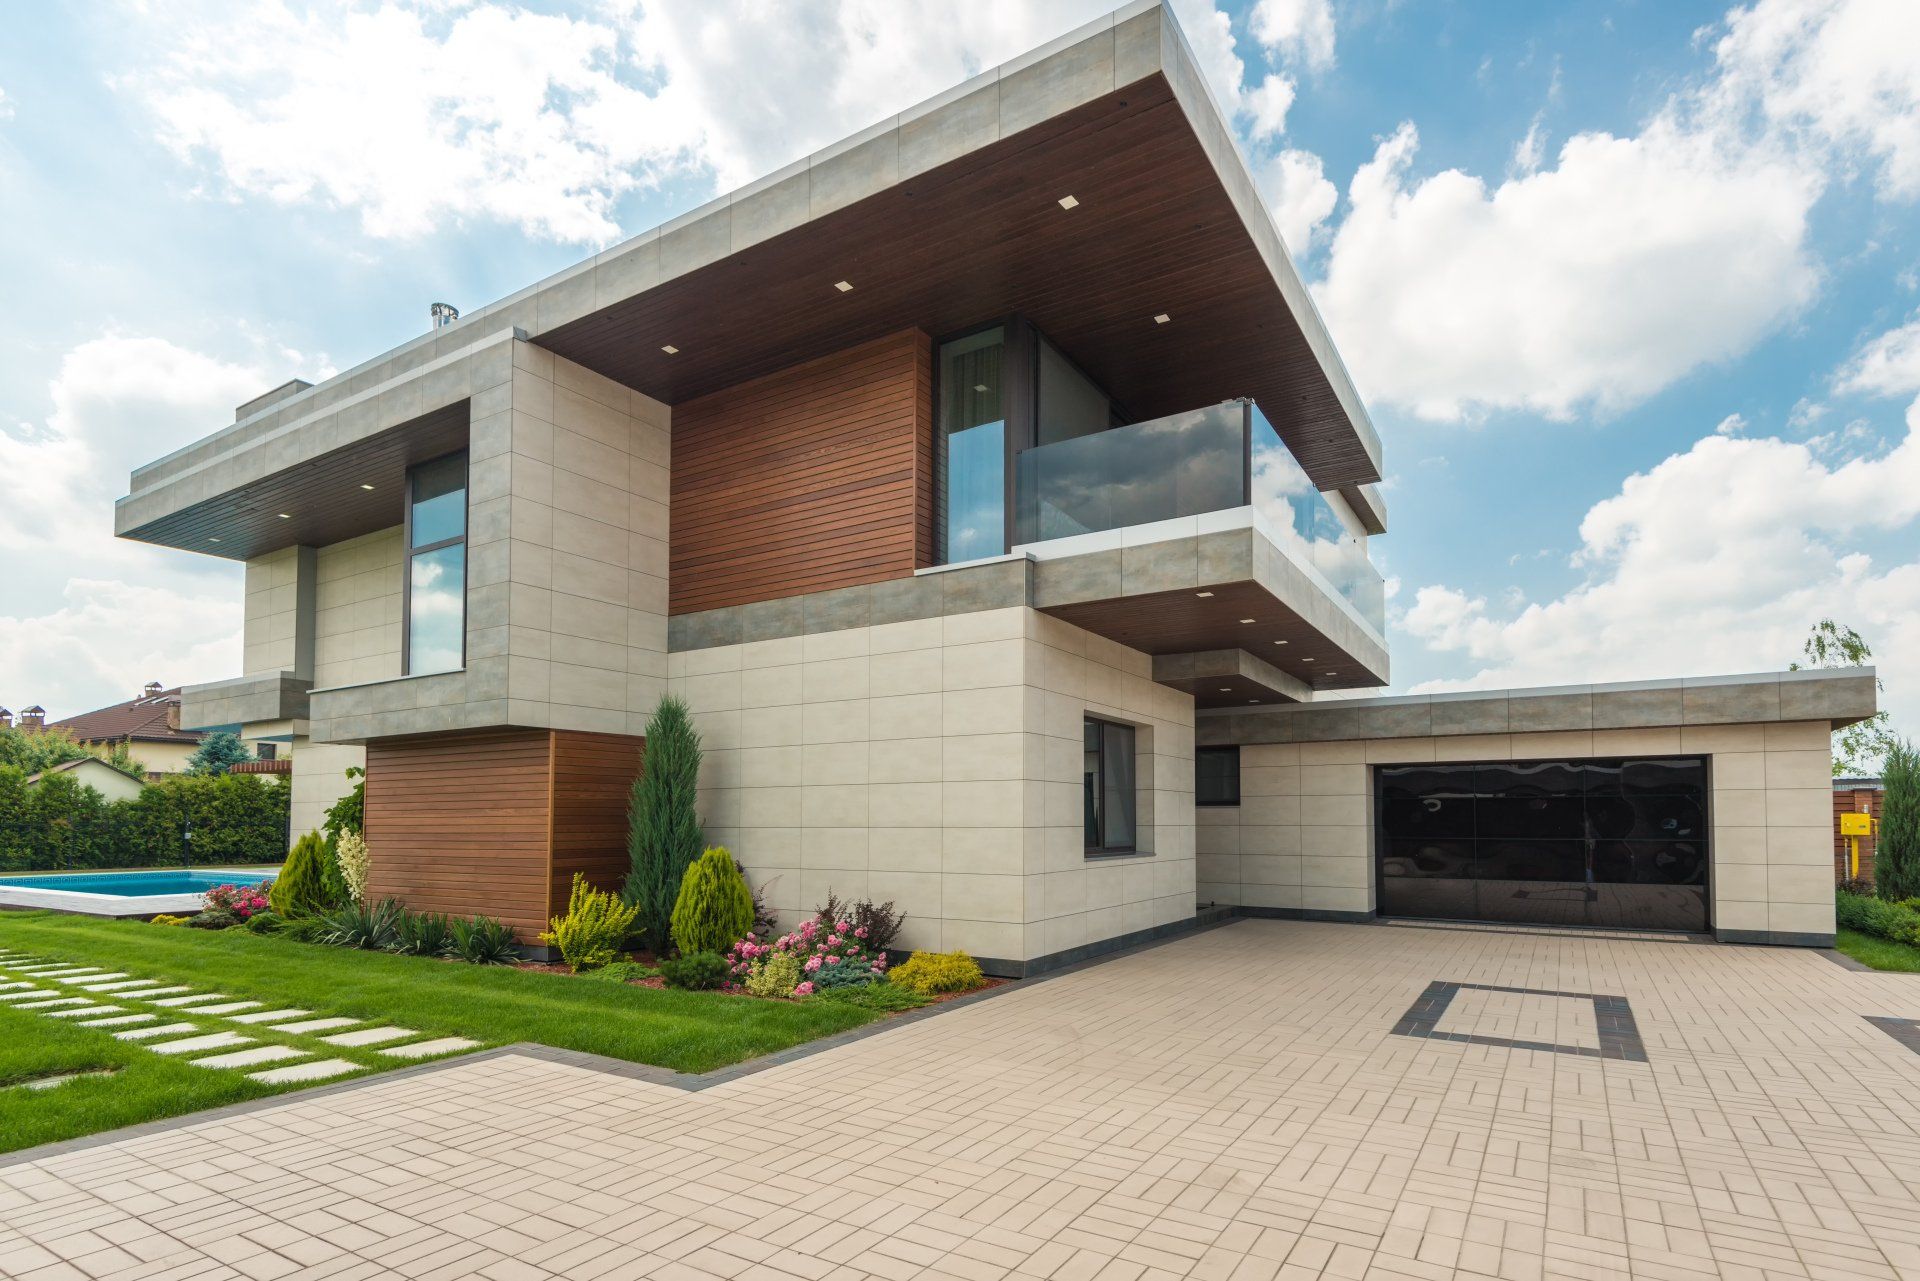 Modern house with a paved driveway